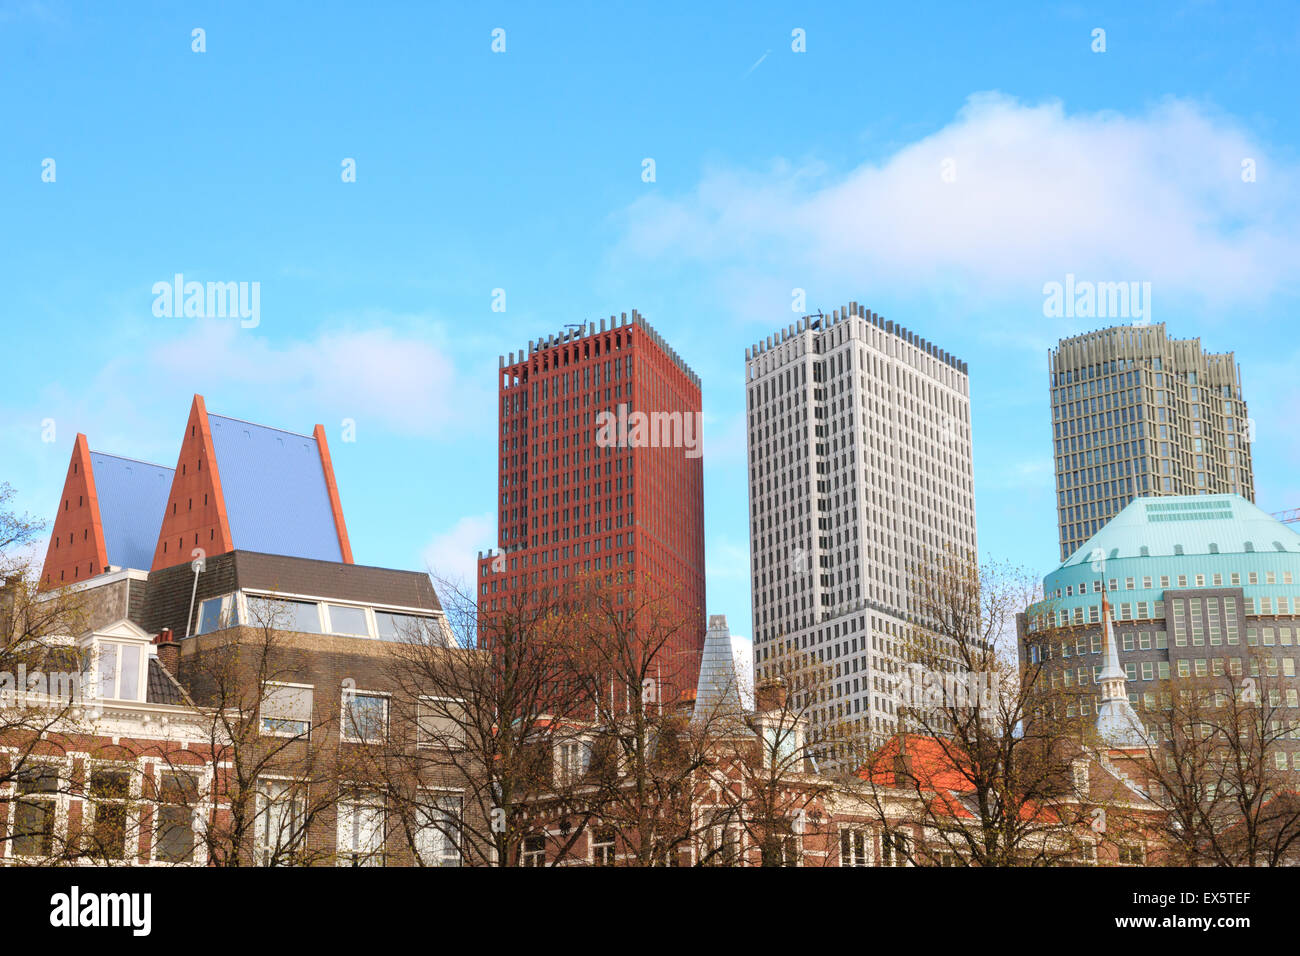 [Editorial Use Only] View on prominent governmental office buildings in The Hague, The Netherlands Stock Photo